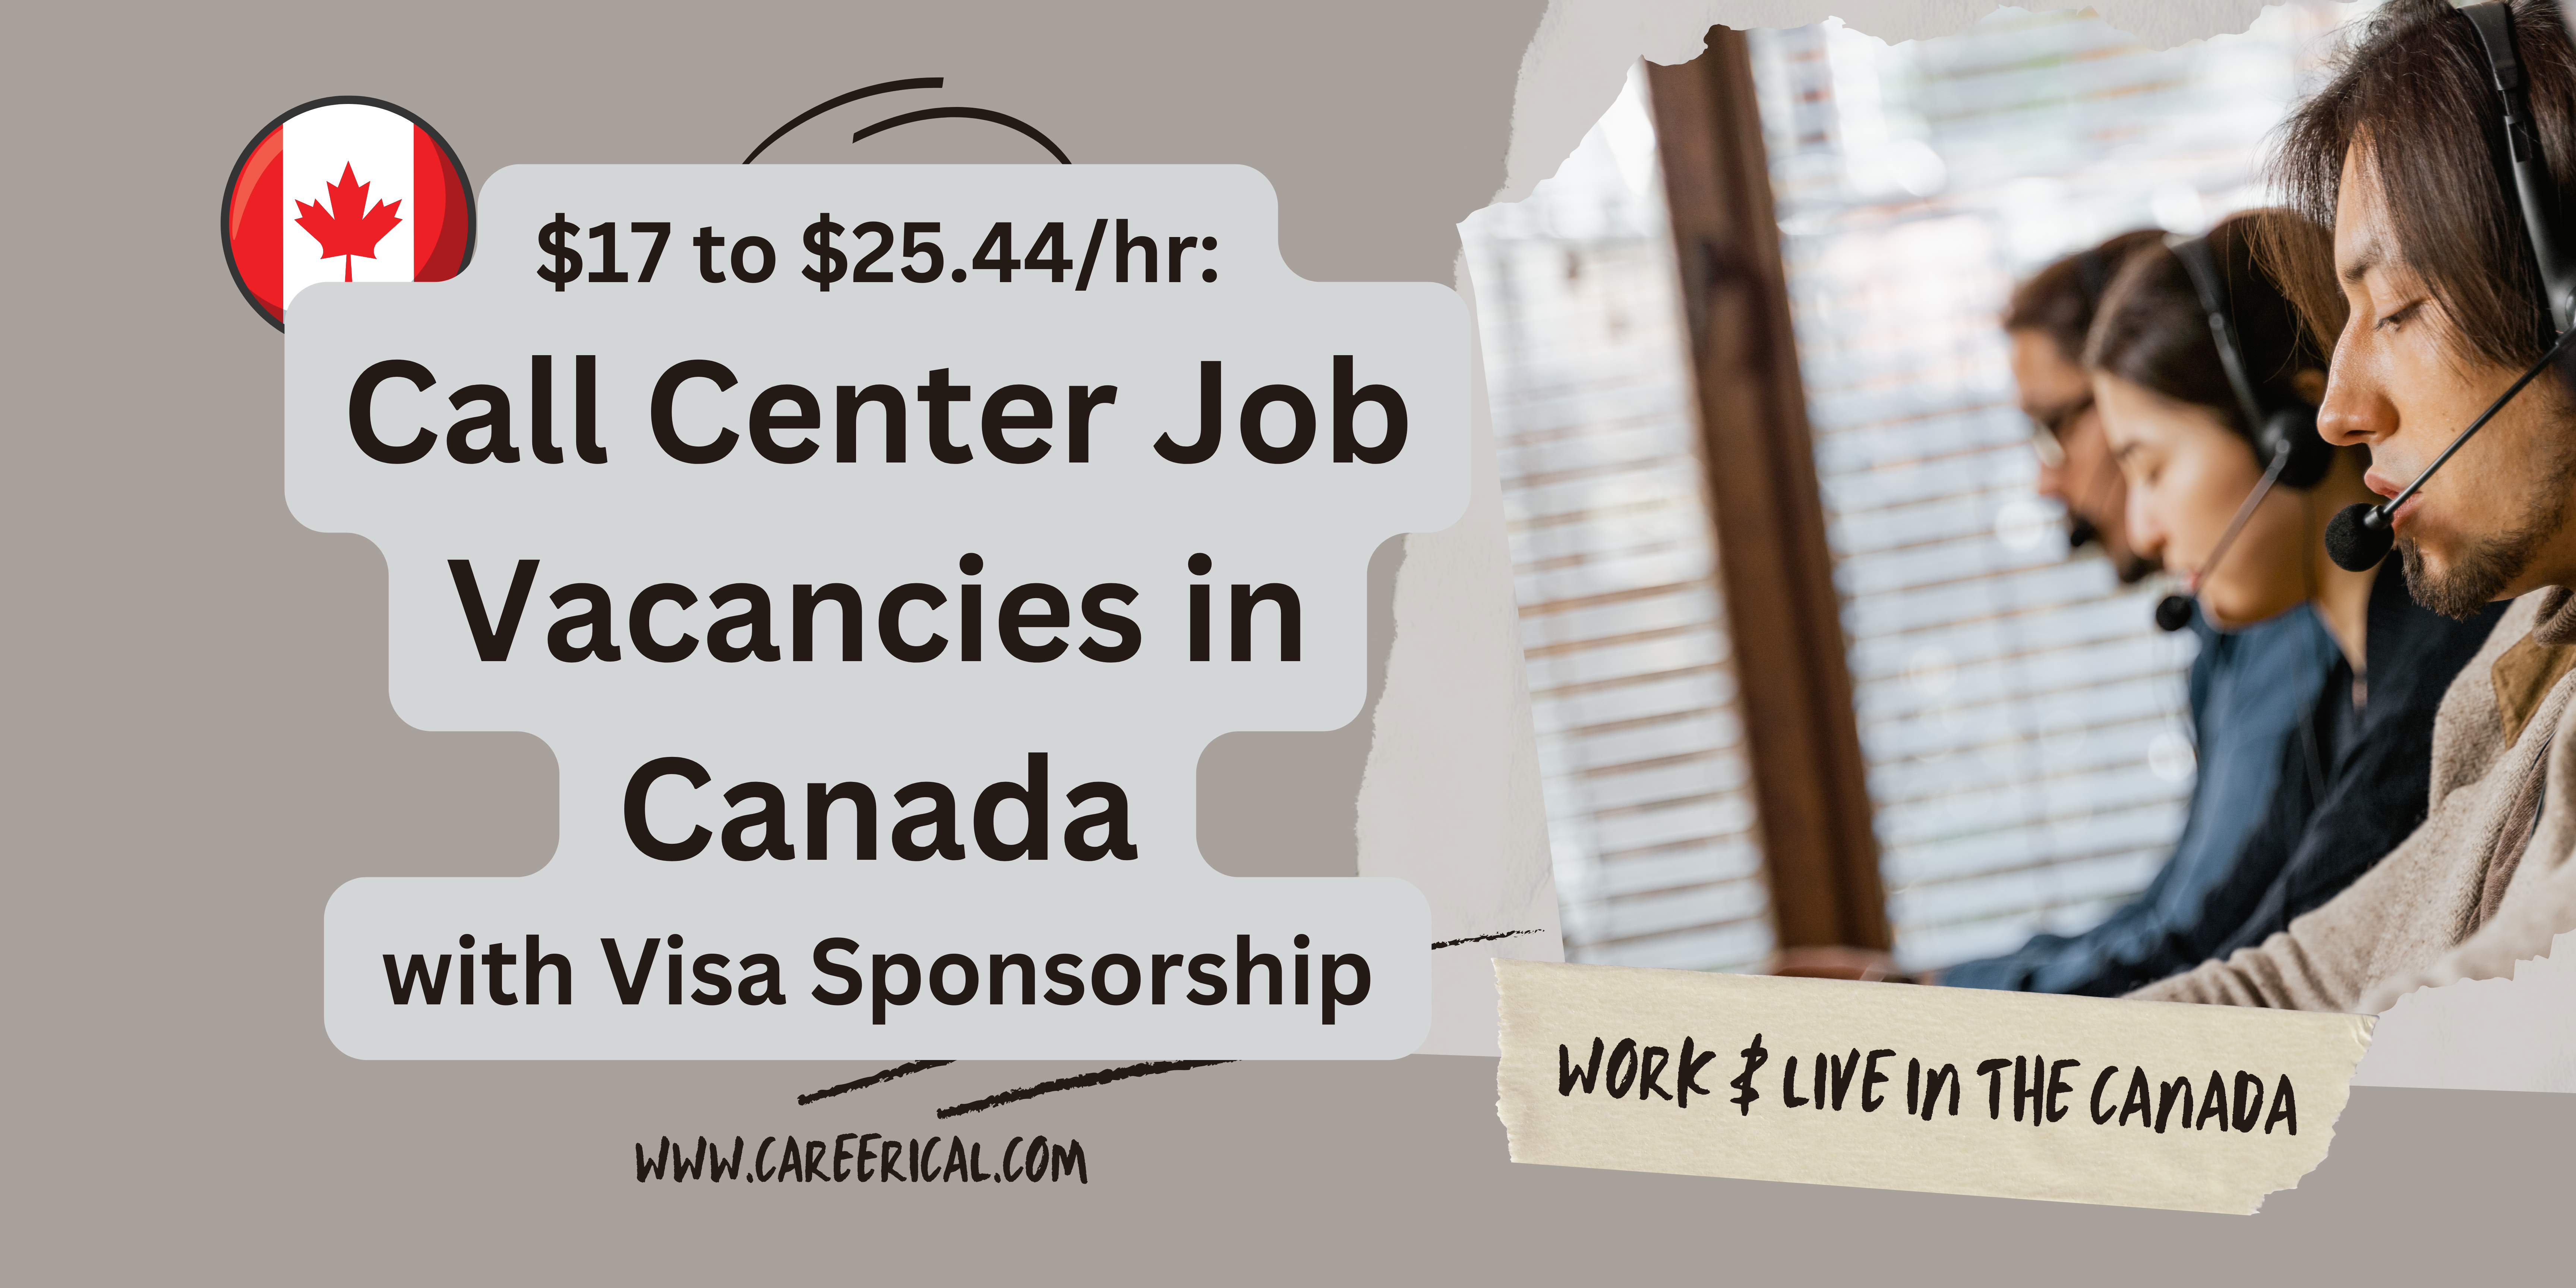 $17 to $25.44hr Call Center Job Vacancies in Canada with Visa Sponsorship